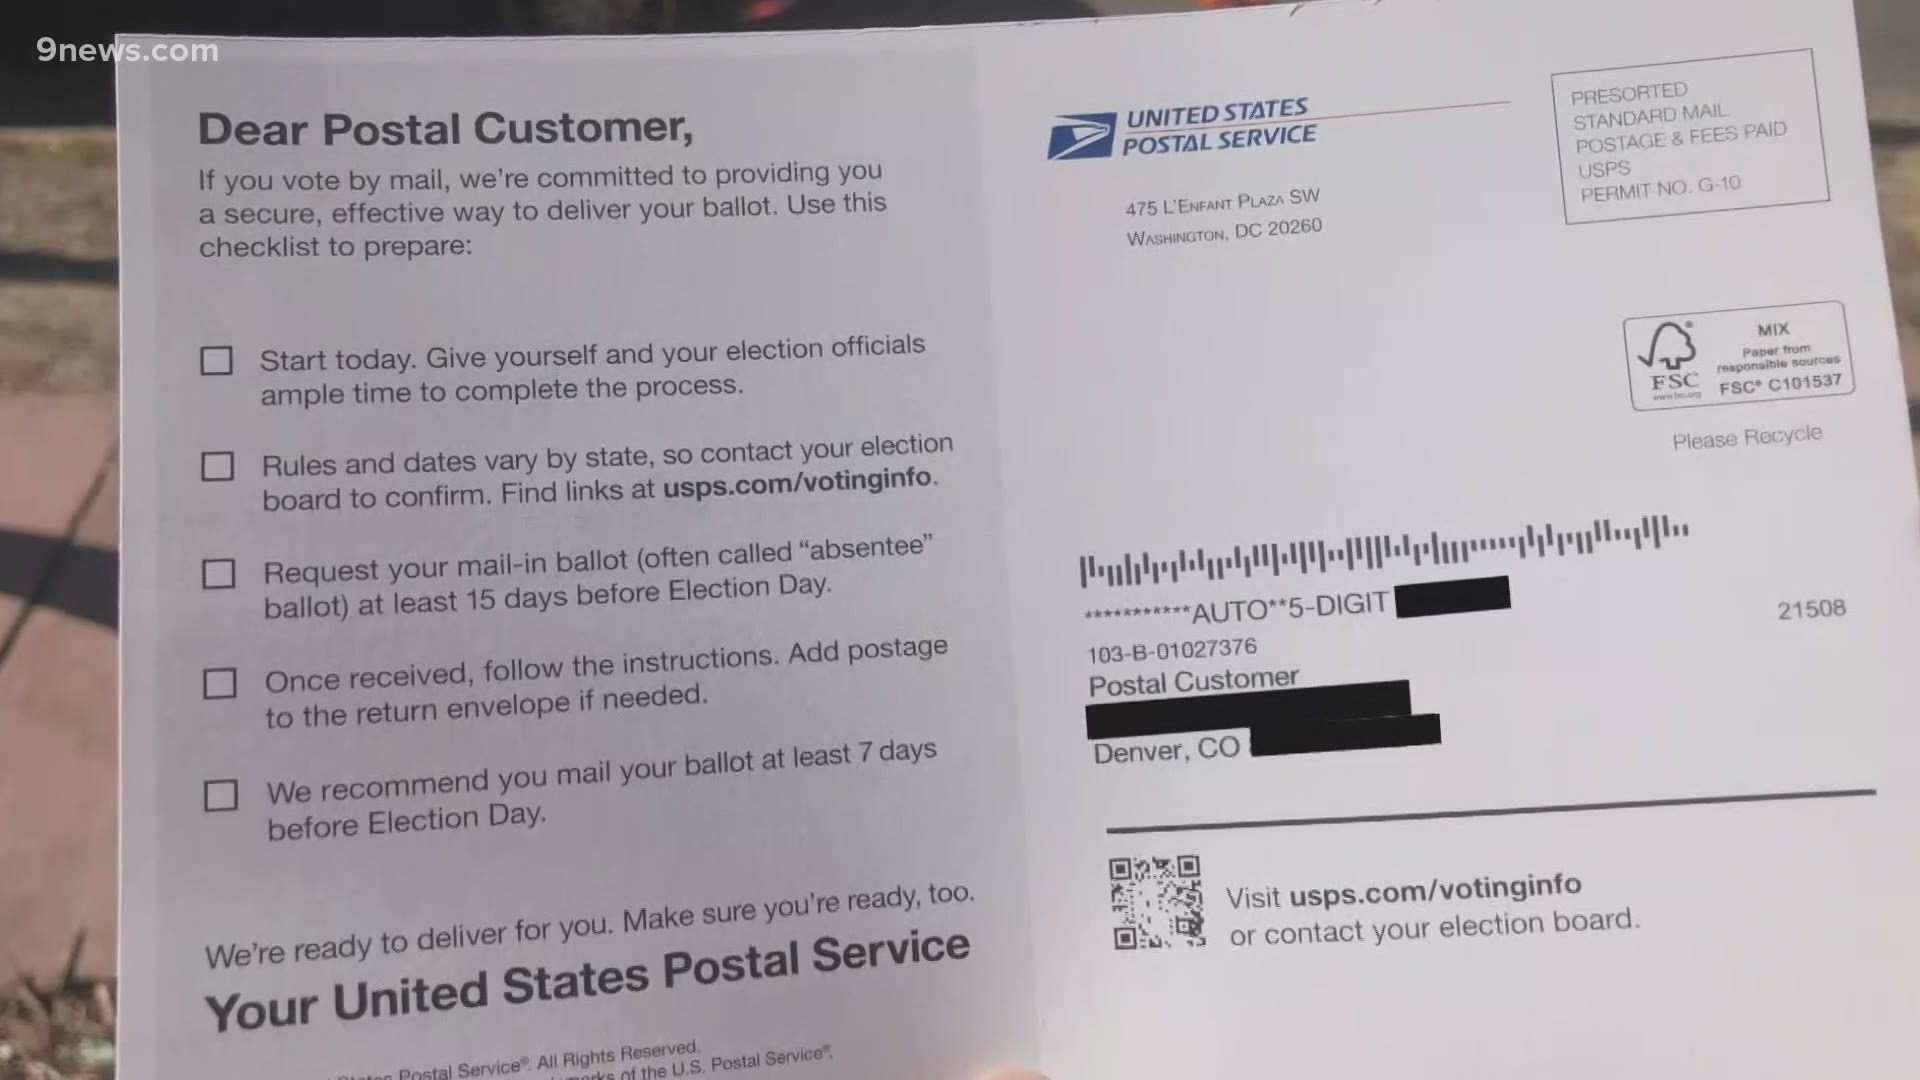 Jena Griswold is the plaintiff in the lawsuit filed against the postmaster general and the U.S. Postal Service over a mailing the suit says makes "false statements."